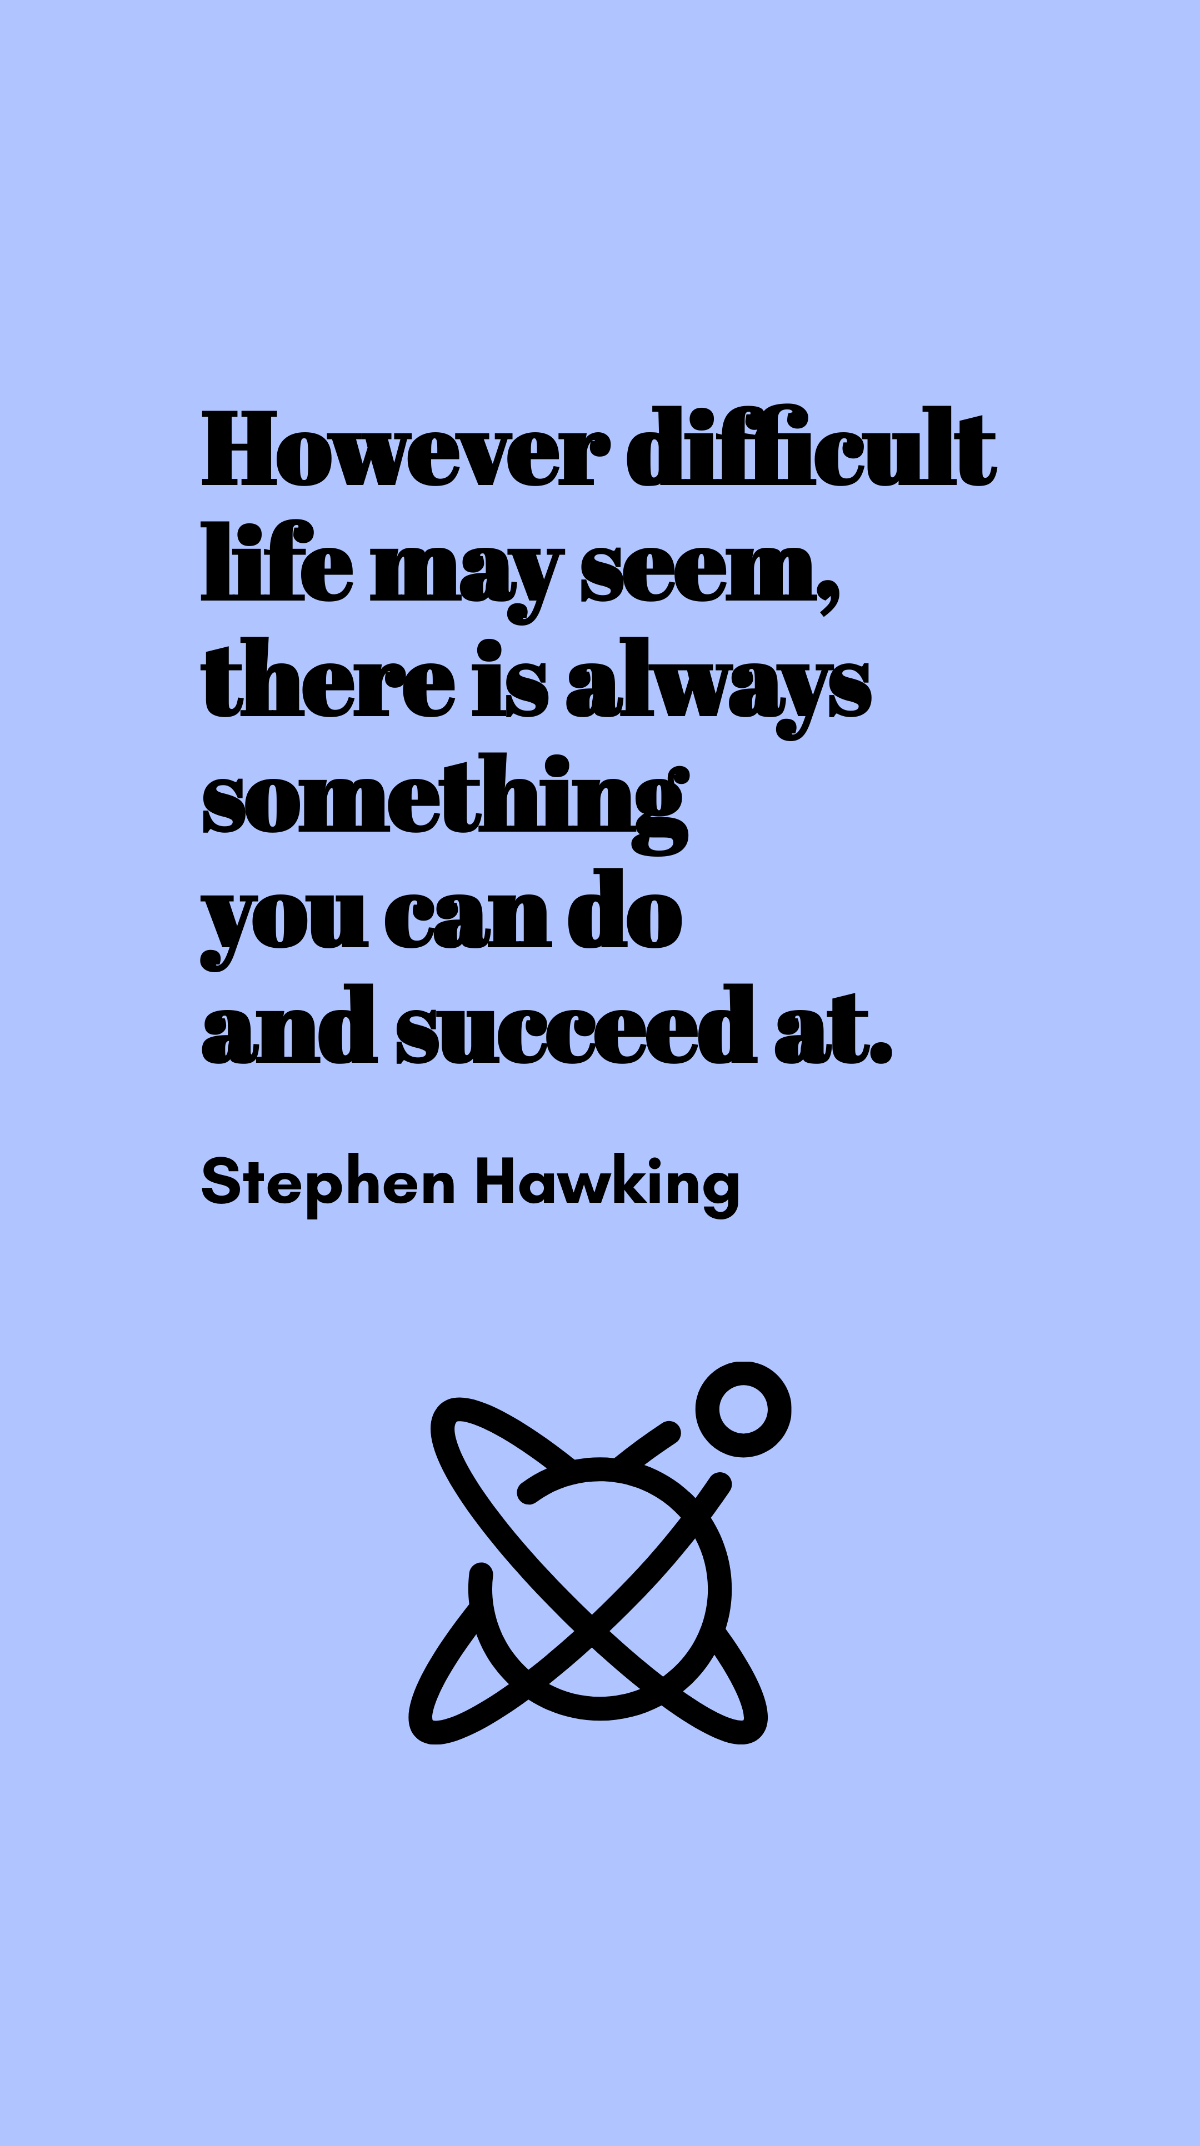 Stephen Hawking - However difficult life may seem, there is always something you can do and succeed at.